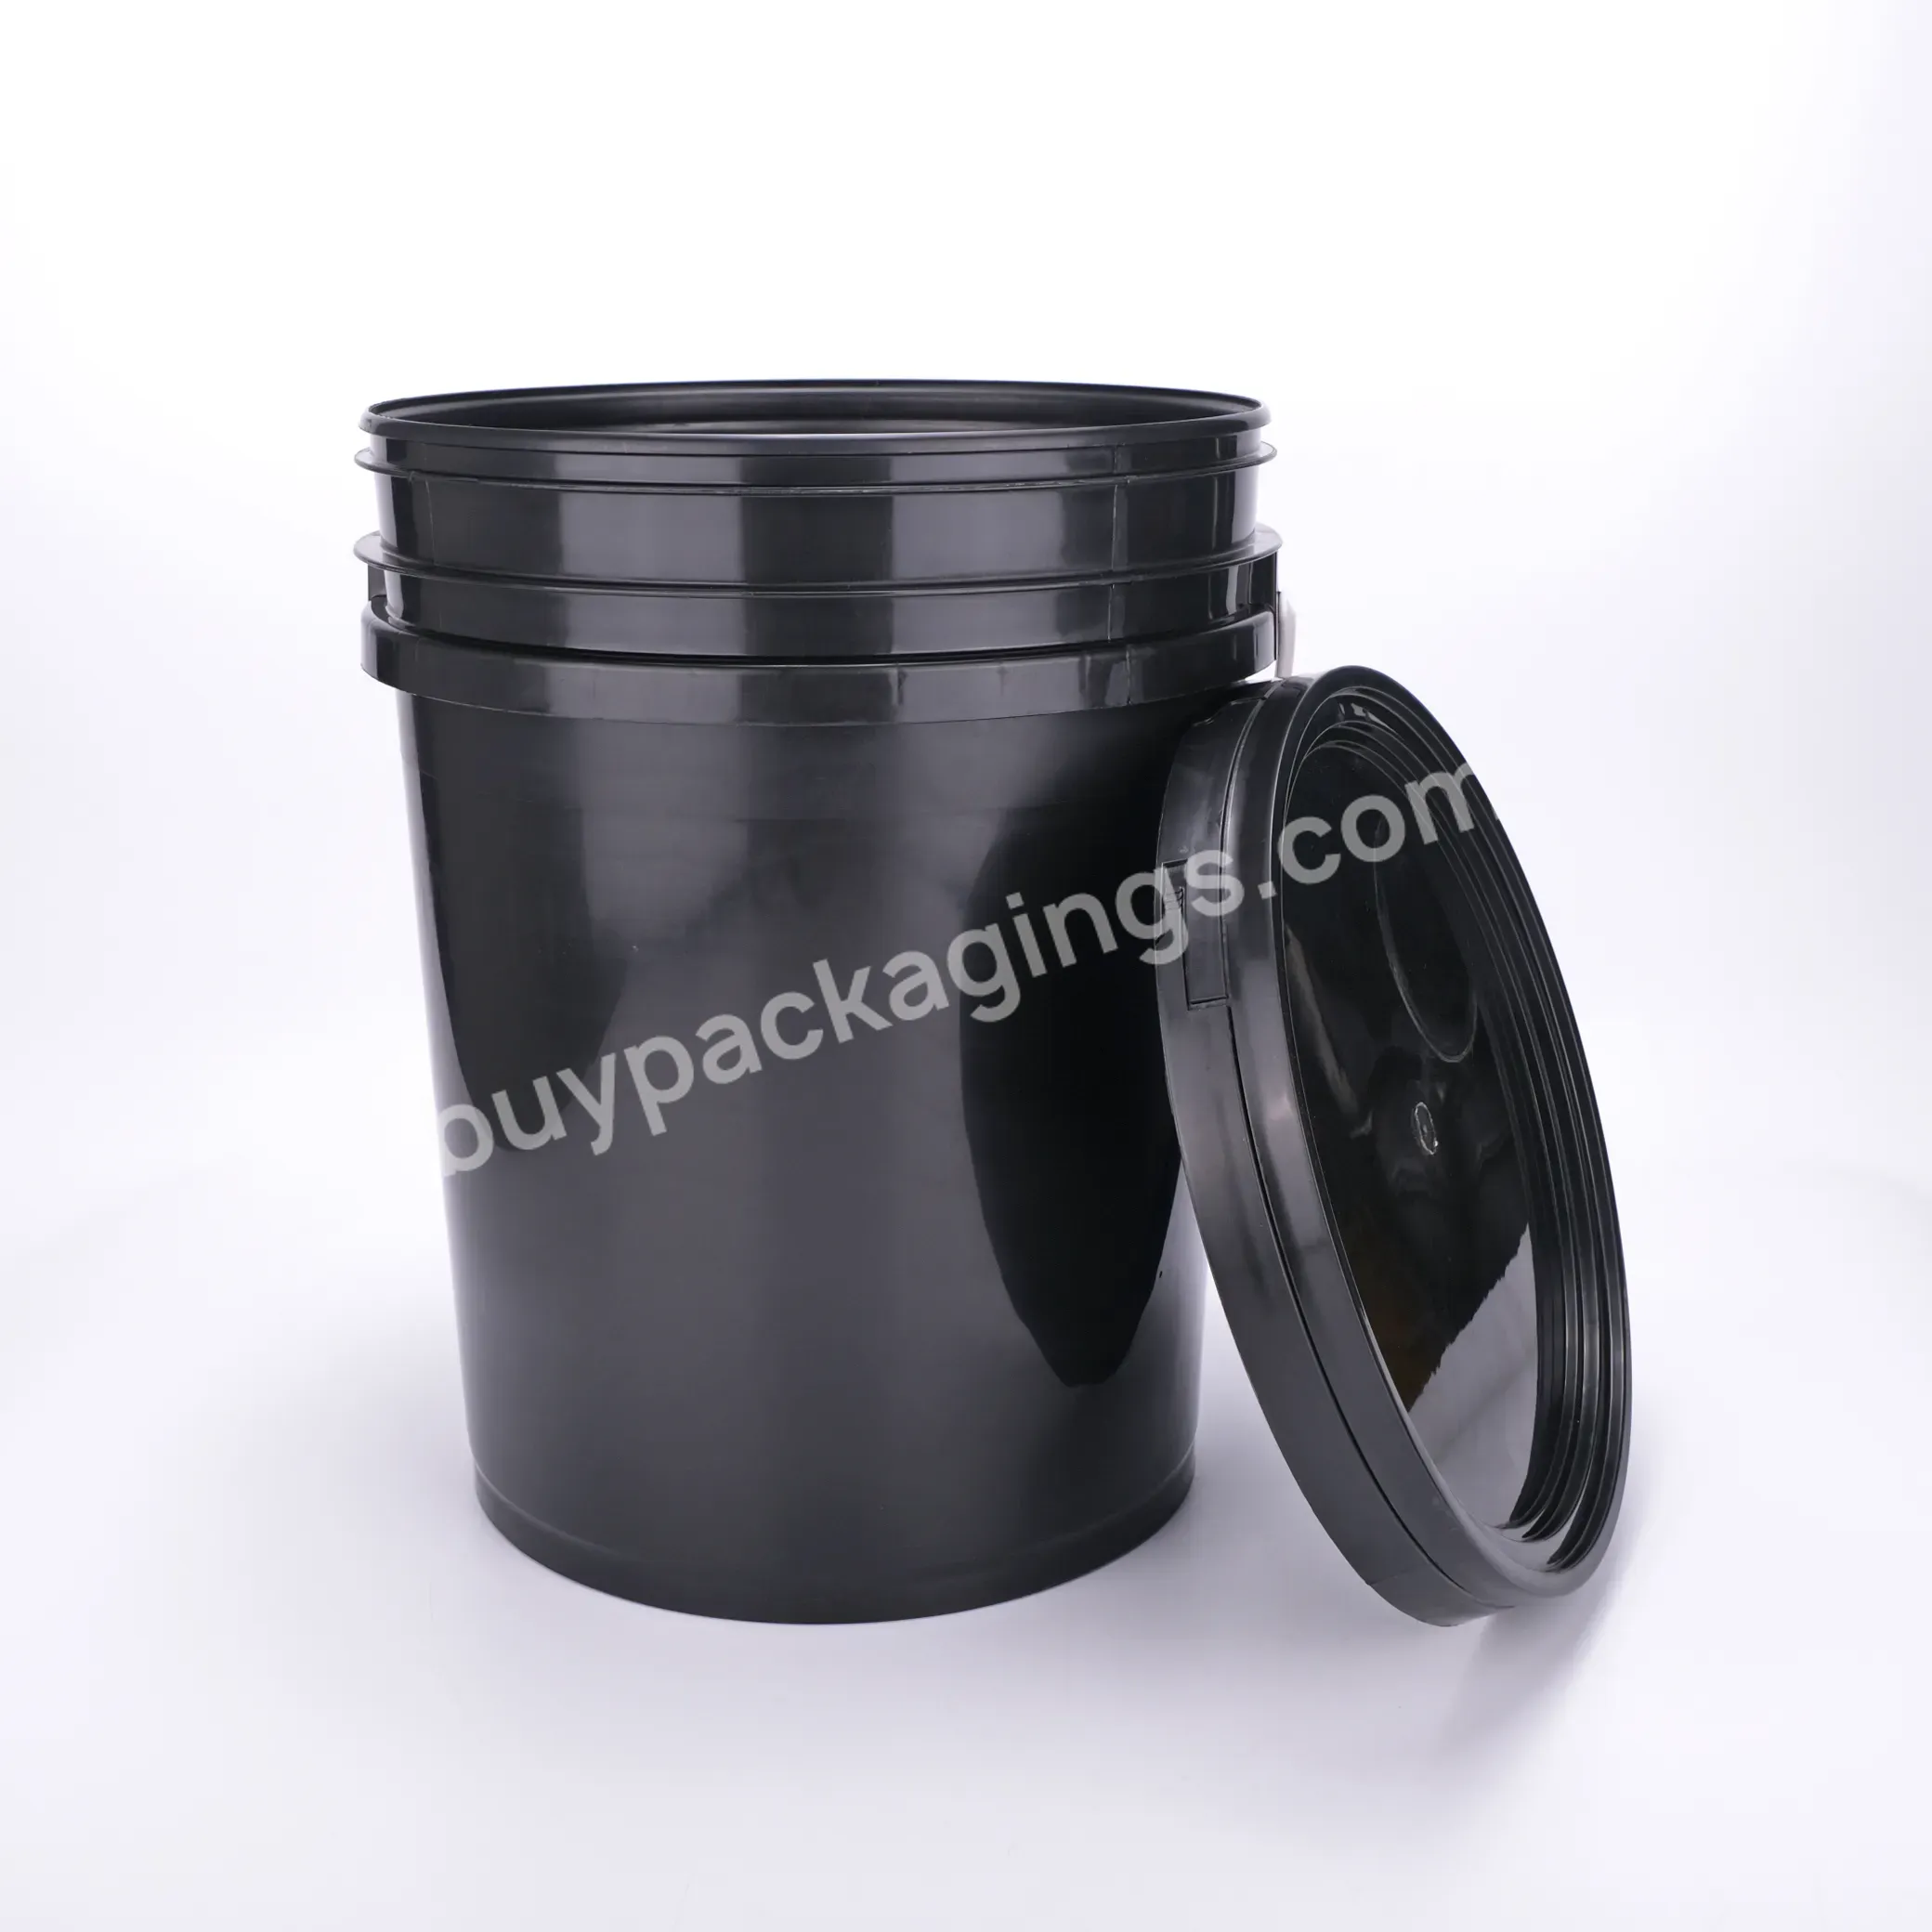 Factory Price Manufacturer Supplier Best Price Best Quality New Style 20l Plastic Buckets - Buy Plastic Bucket Sale,China Plastic Buckets,Cheap Plastic Bucket.